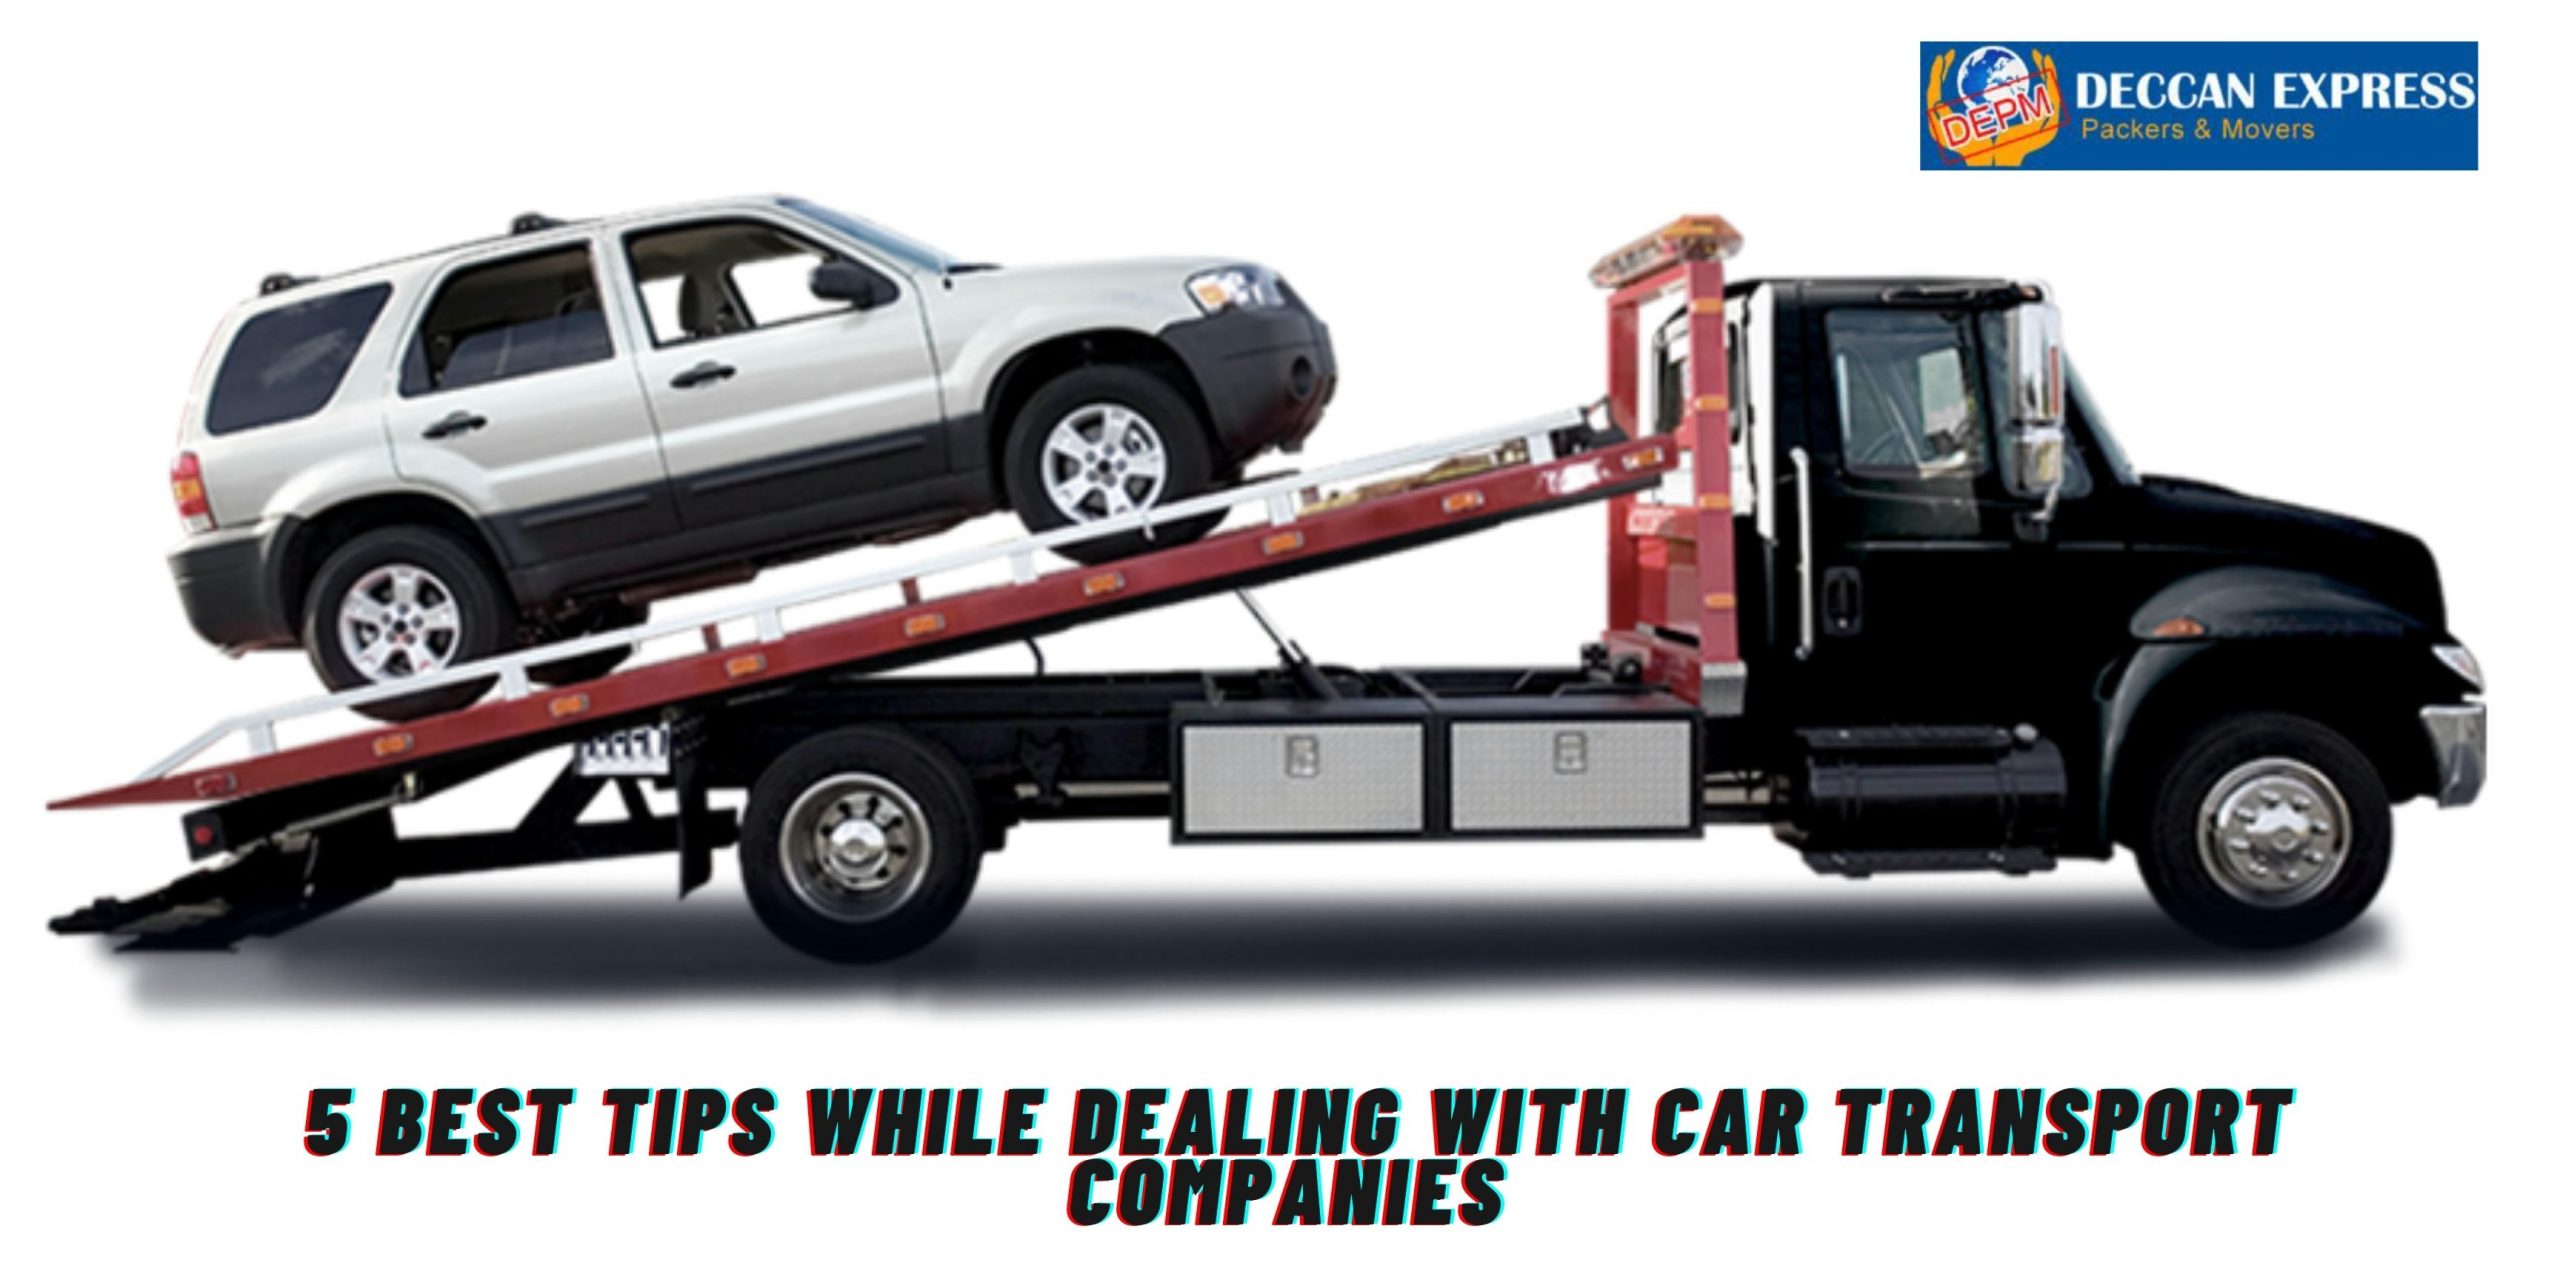 5 Best Tips While Dealing With Car Transport Companies